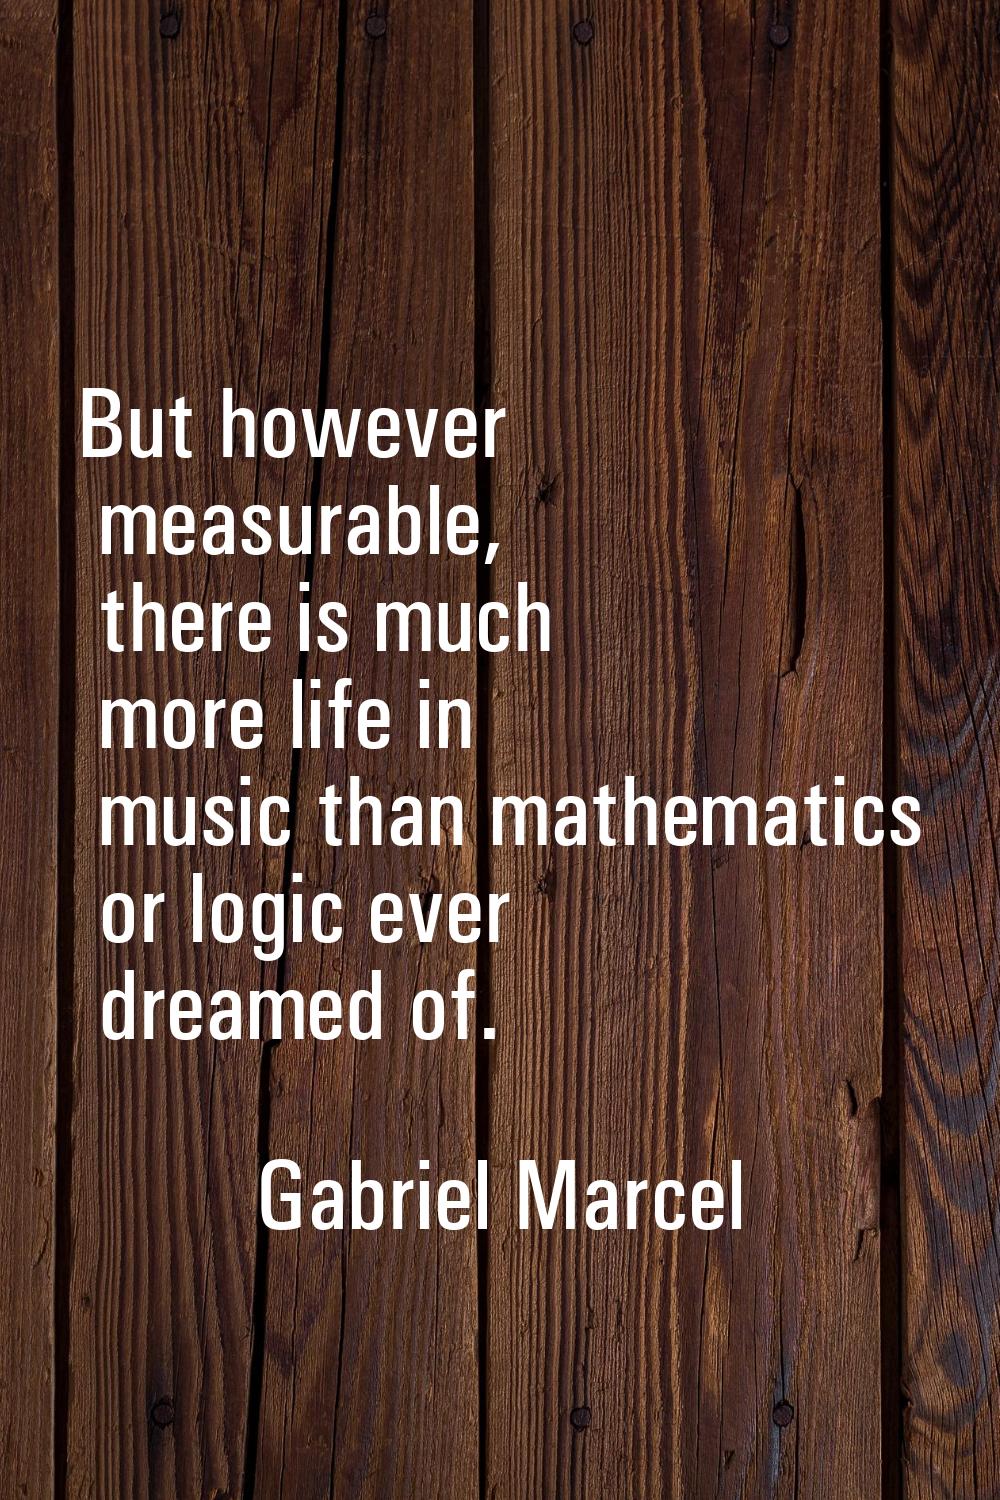 But however measurable, there is much more life in music than mathematics or logic ever dreamed of.